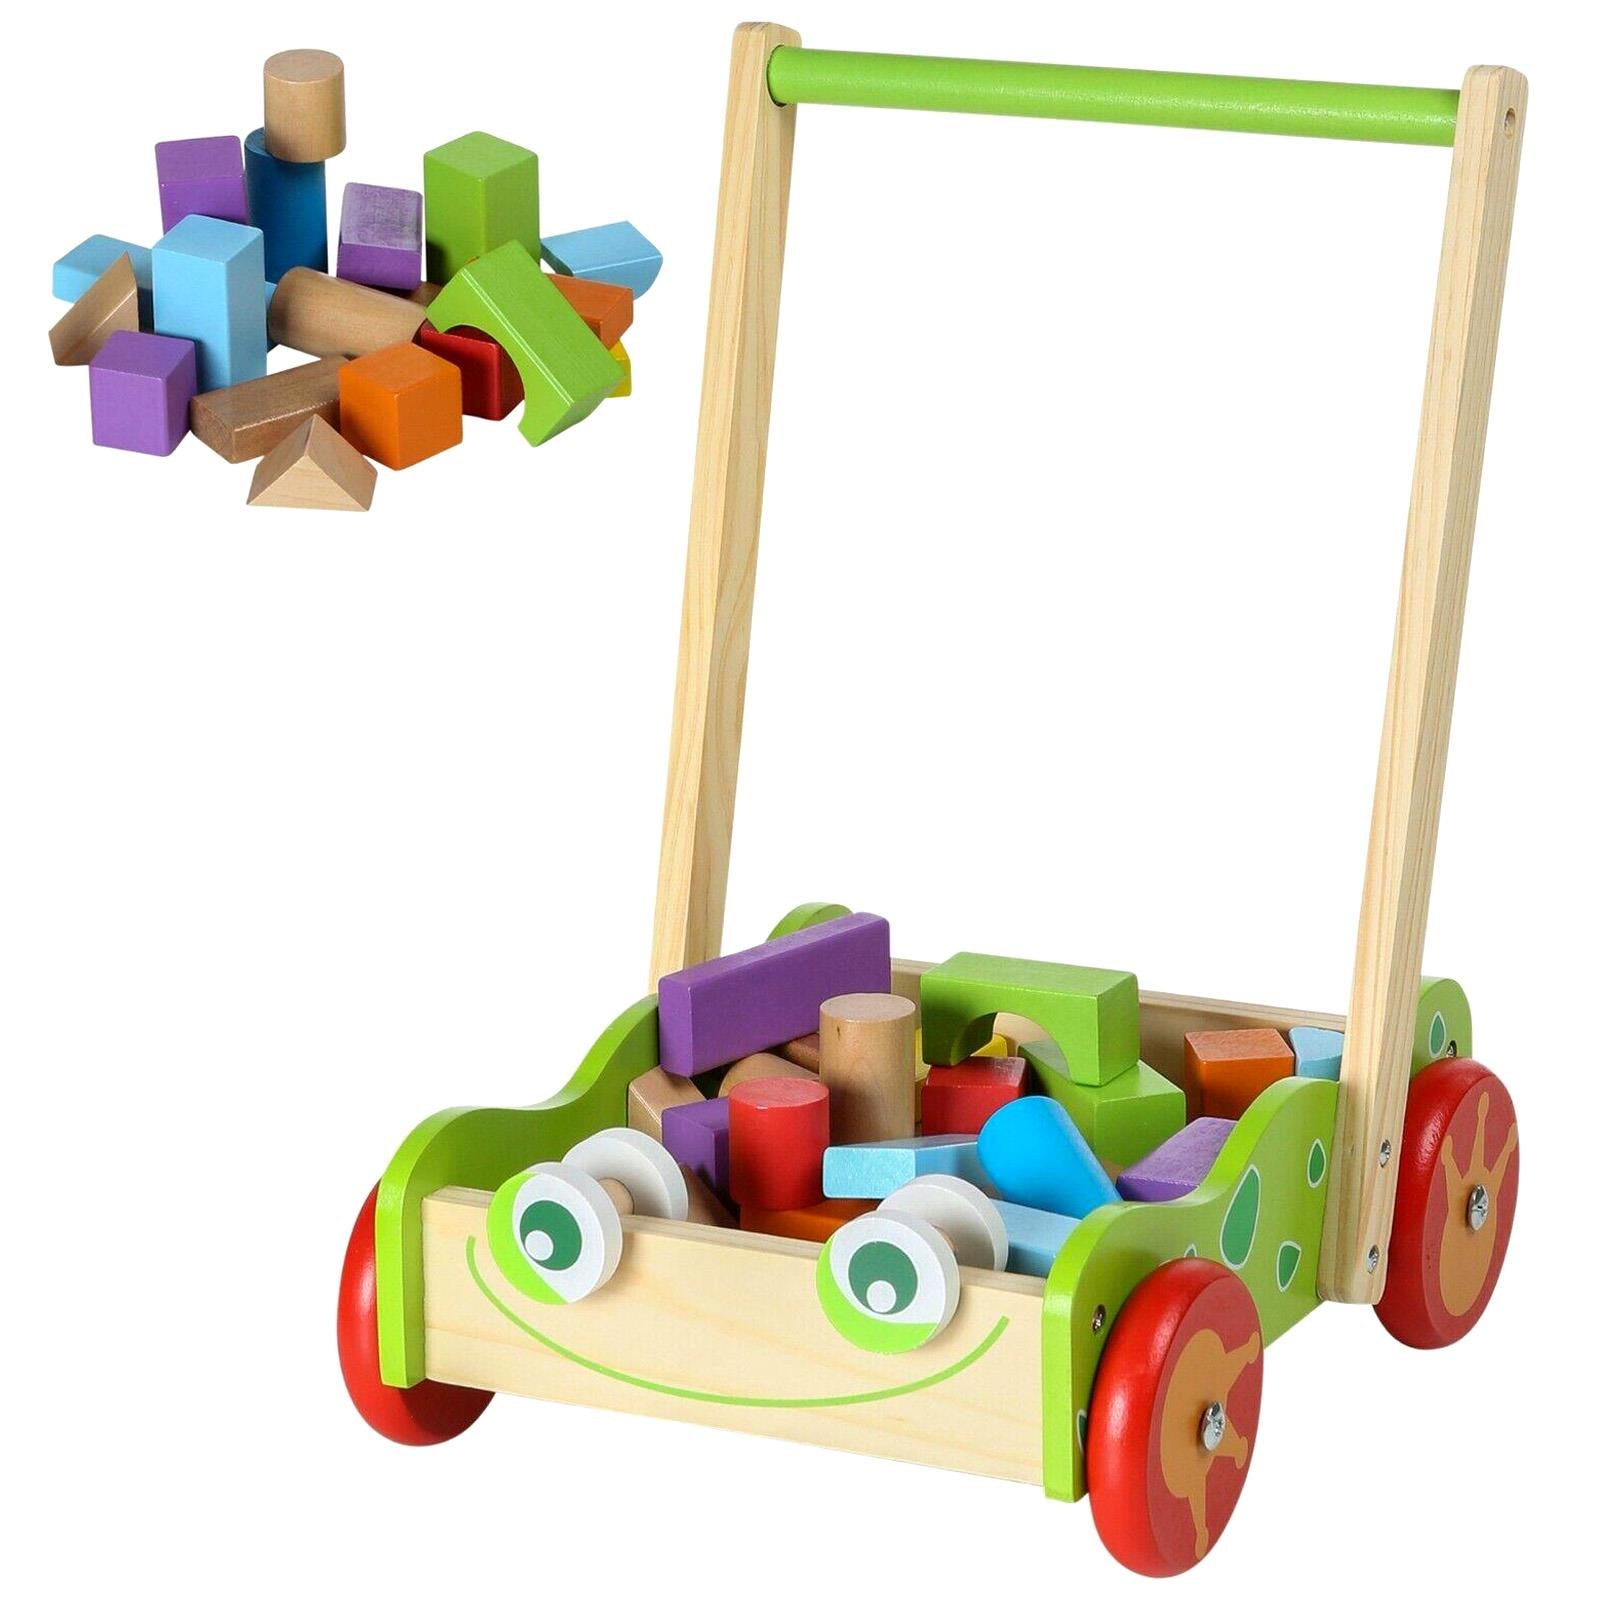 Baby Wooden Walker and Building Bricks Set by The Magic Toy Shop - The Magic Toy Shop